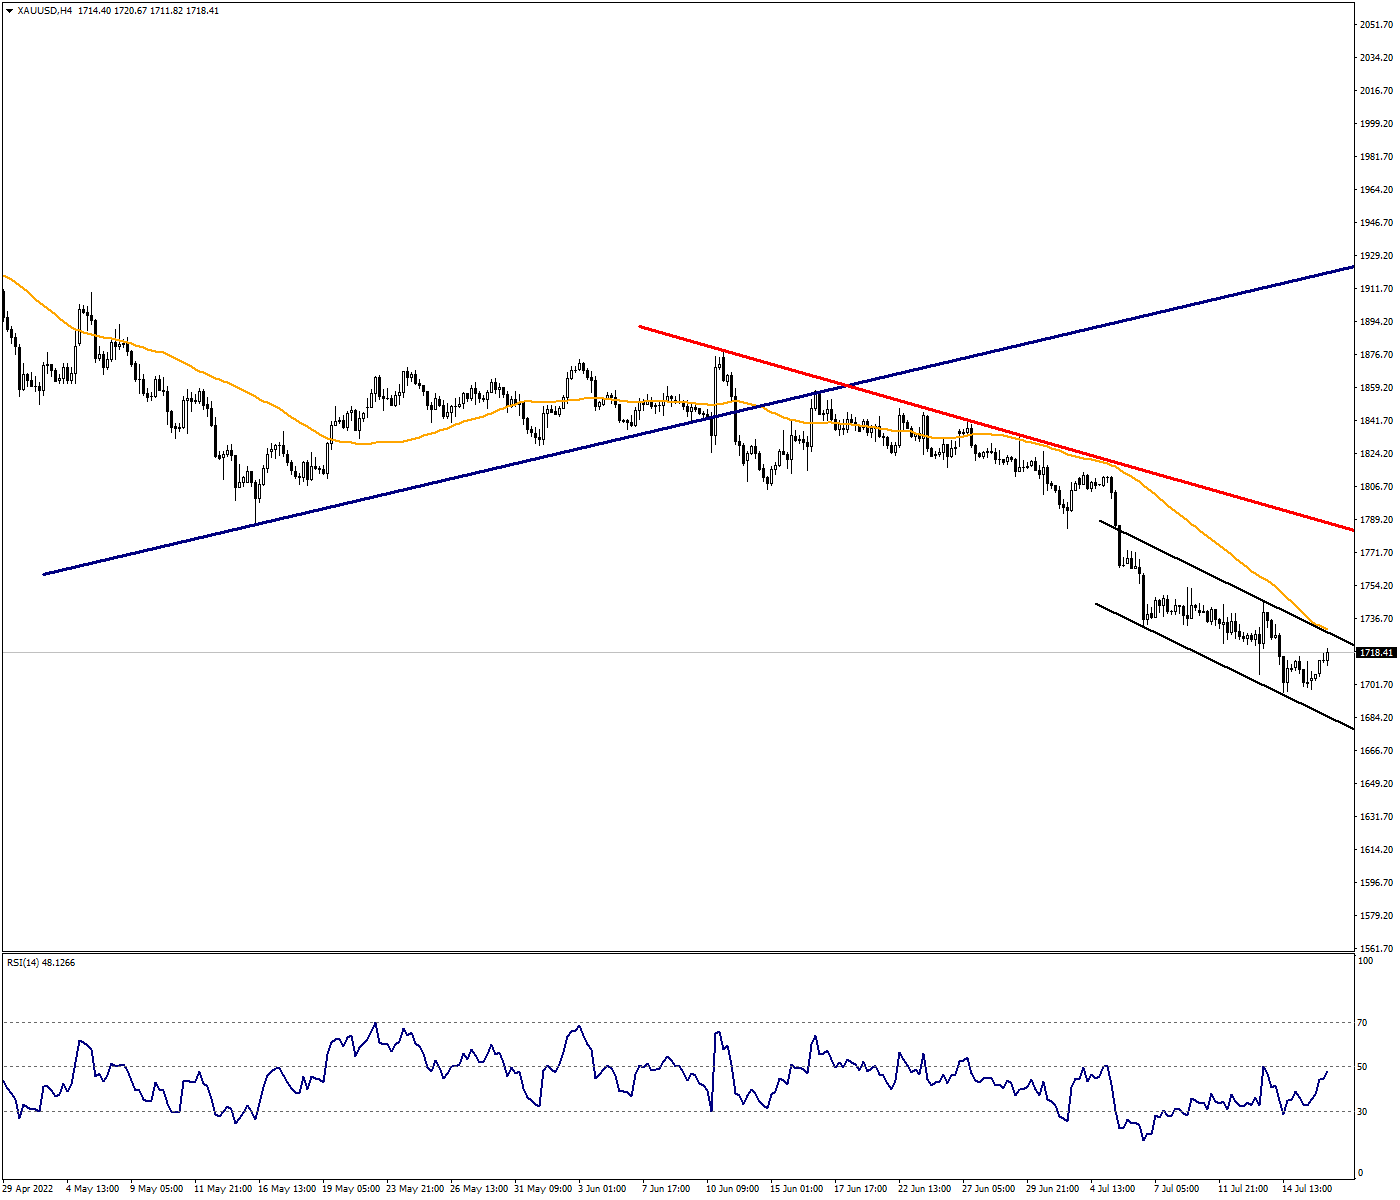 XAUUSD has difficulty in finding demand